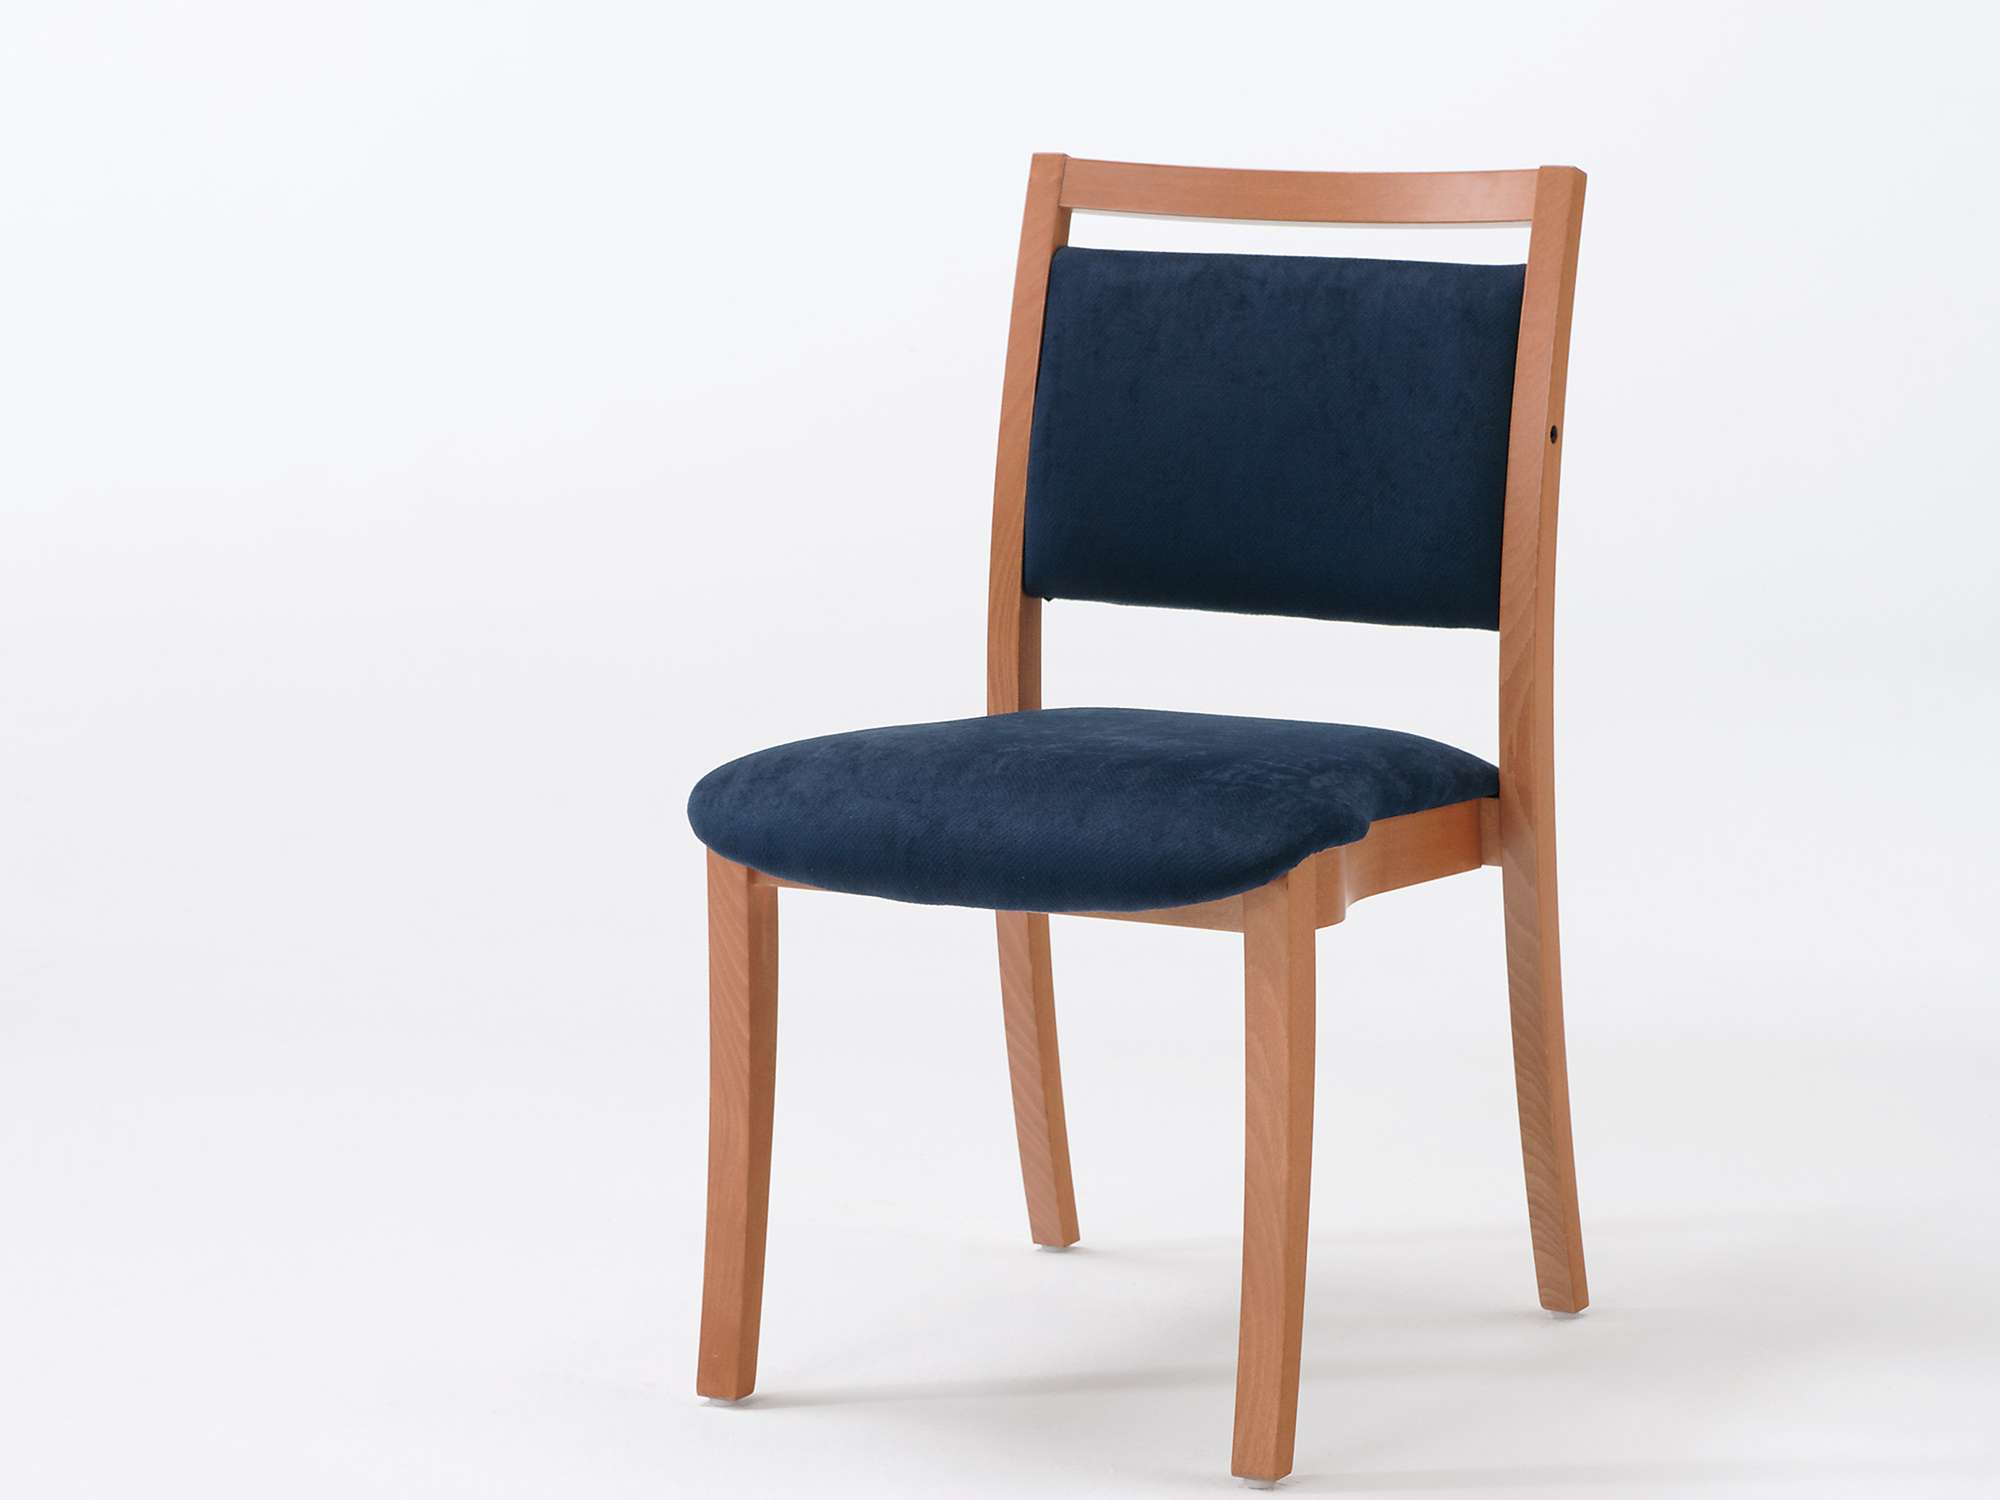 The Sedego as a stacking chair with handle